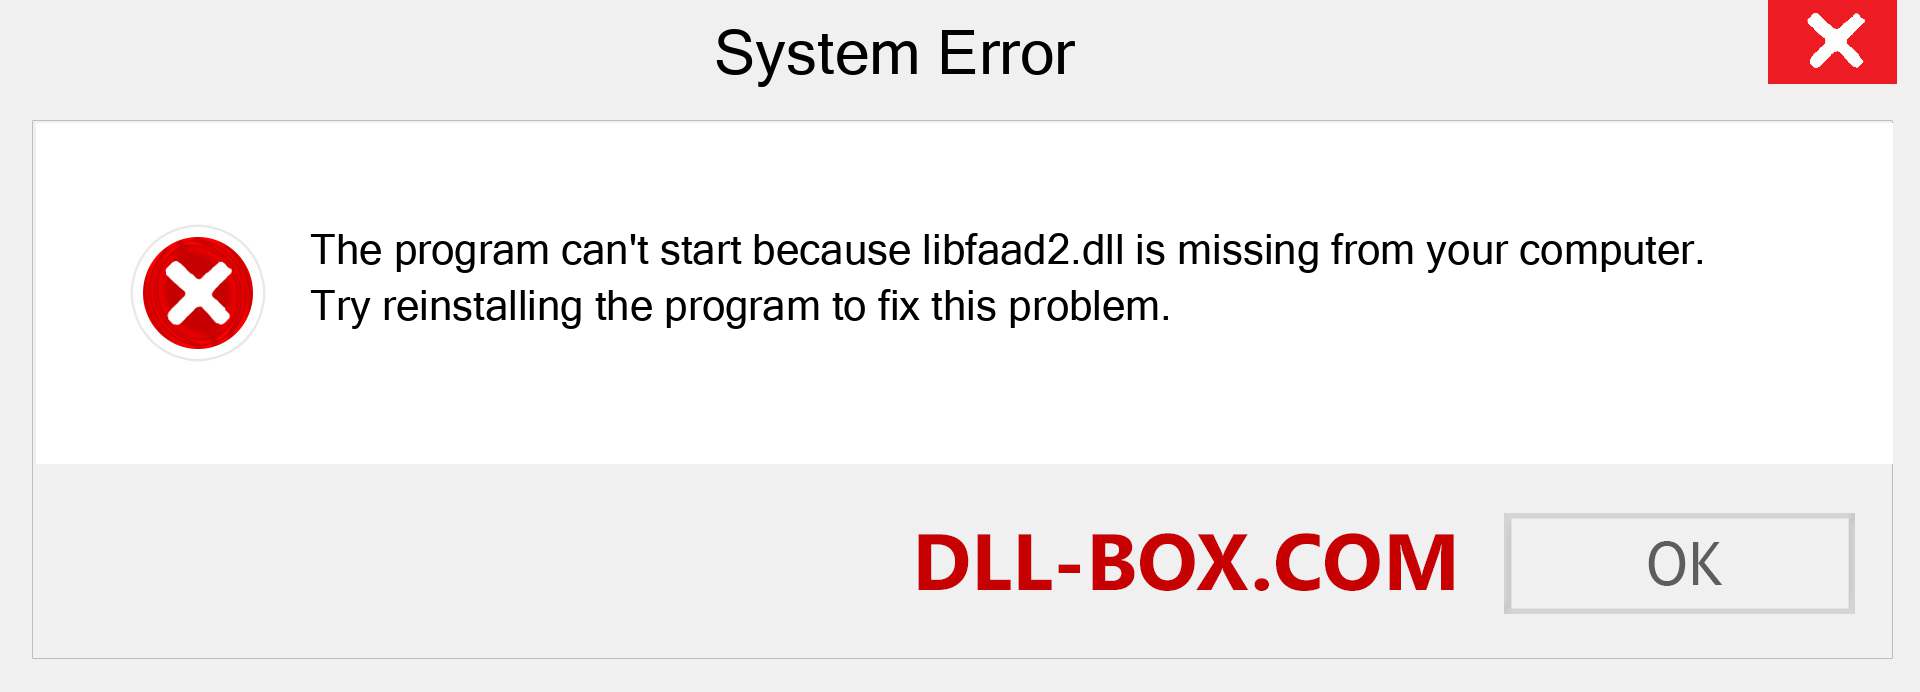  libfaad2.dll file is missing?. Download for Windows 7, 8, 10 - Fix  libfaad2 dll Missing Error on Windows, photos, images